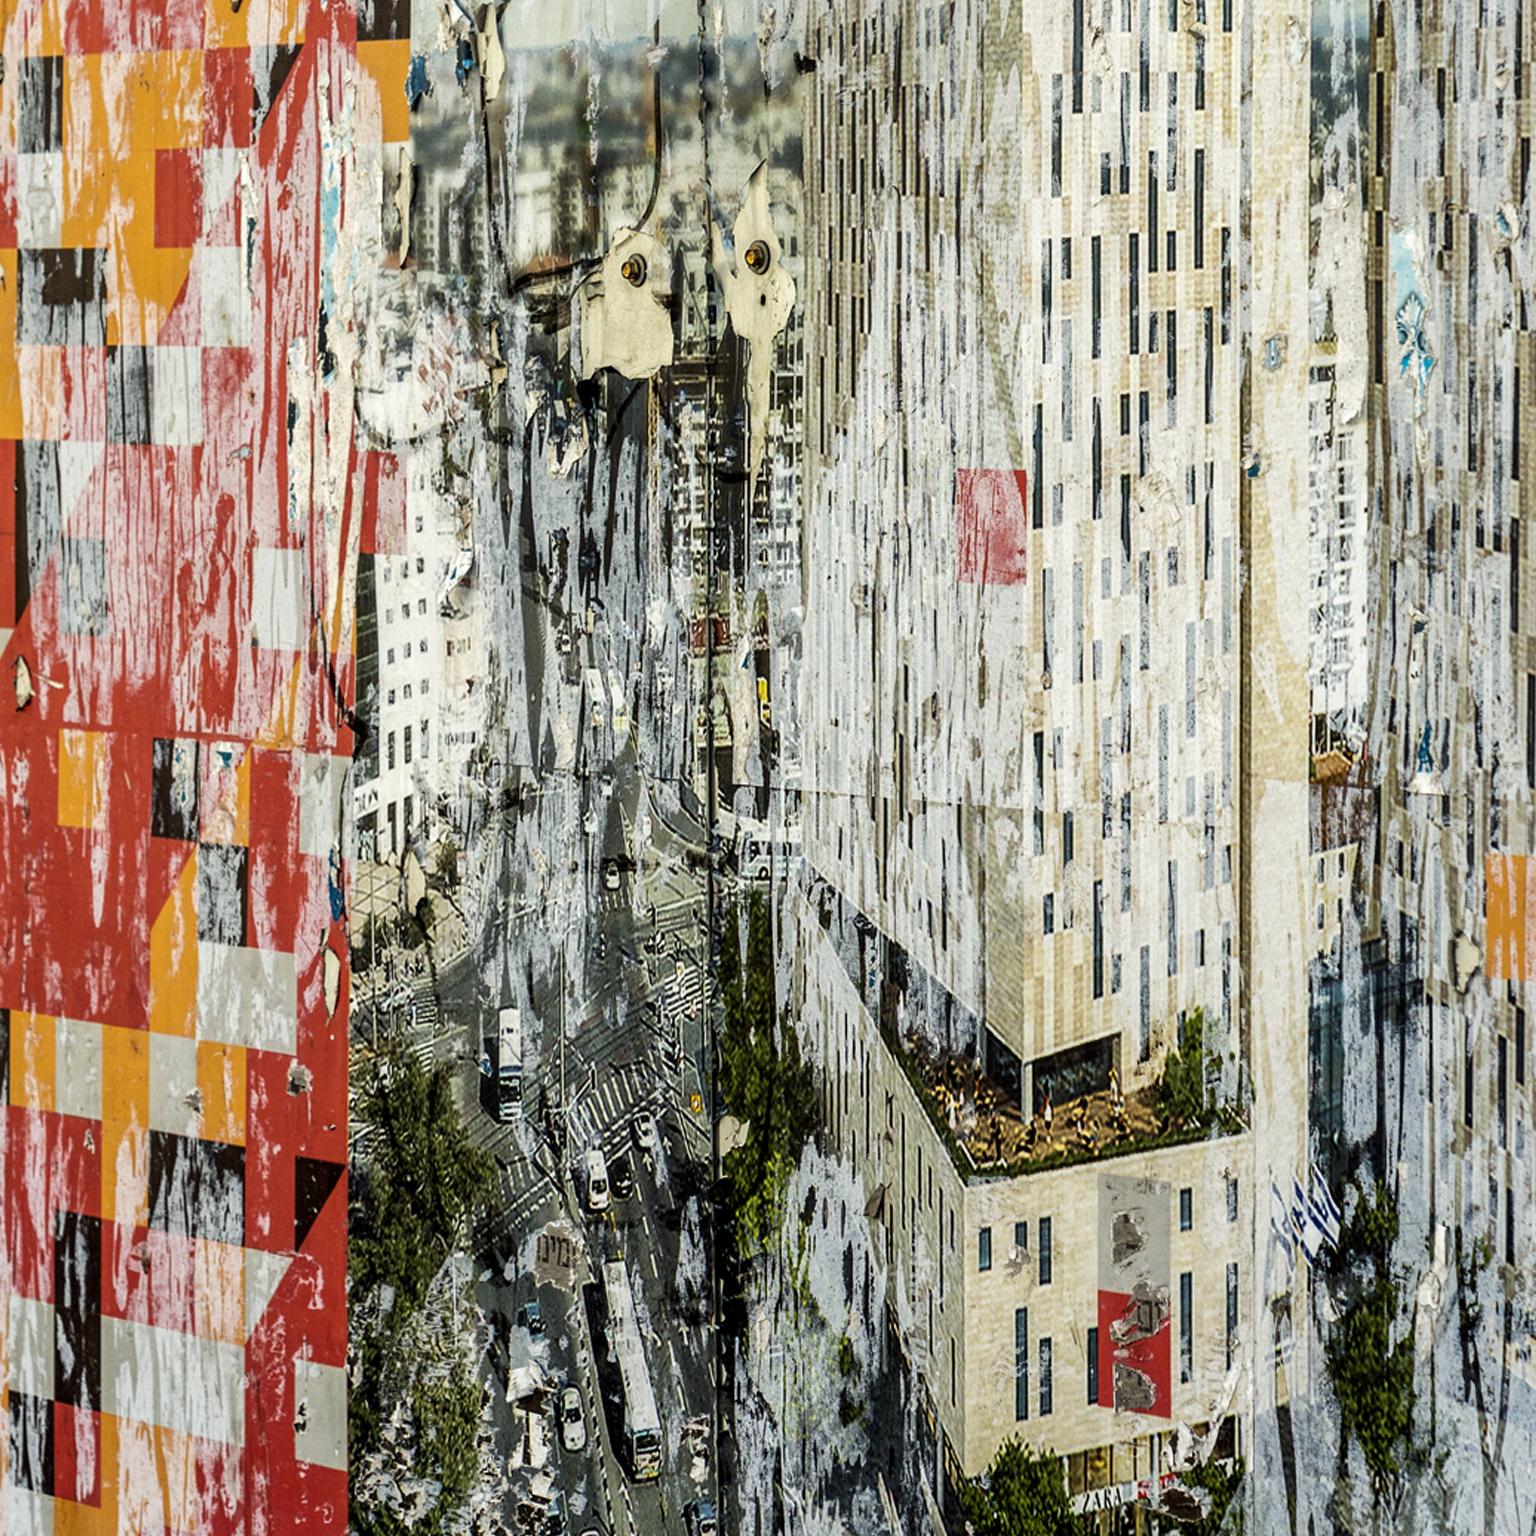 Eli Freiman
Abstract Urban Landscape, 2020
Photograph, c-print on Diasec
100x150 cm
ed. 6

Eli Freiman, born in Israel in 1960, is the son of renowned Jerusalem artist and silversmith Shuki Freiman. His studies include a PhD in Jewish History from